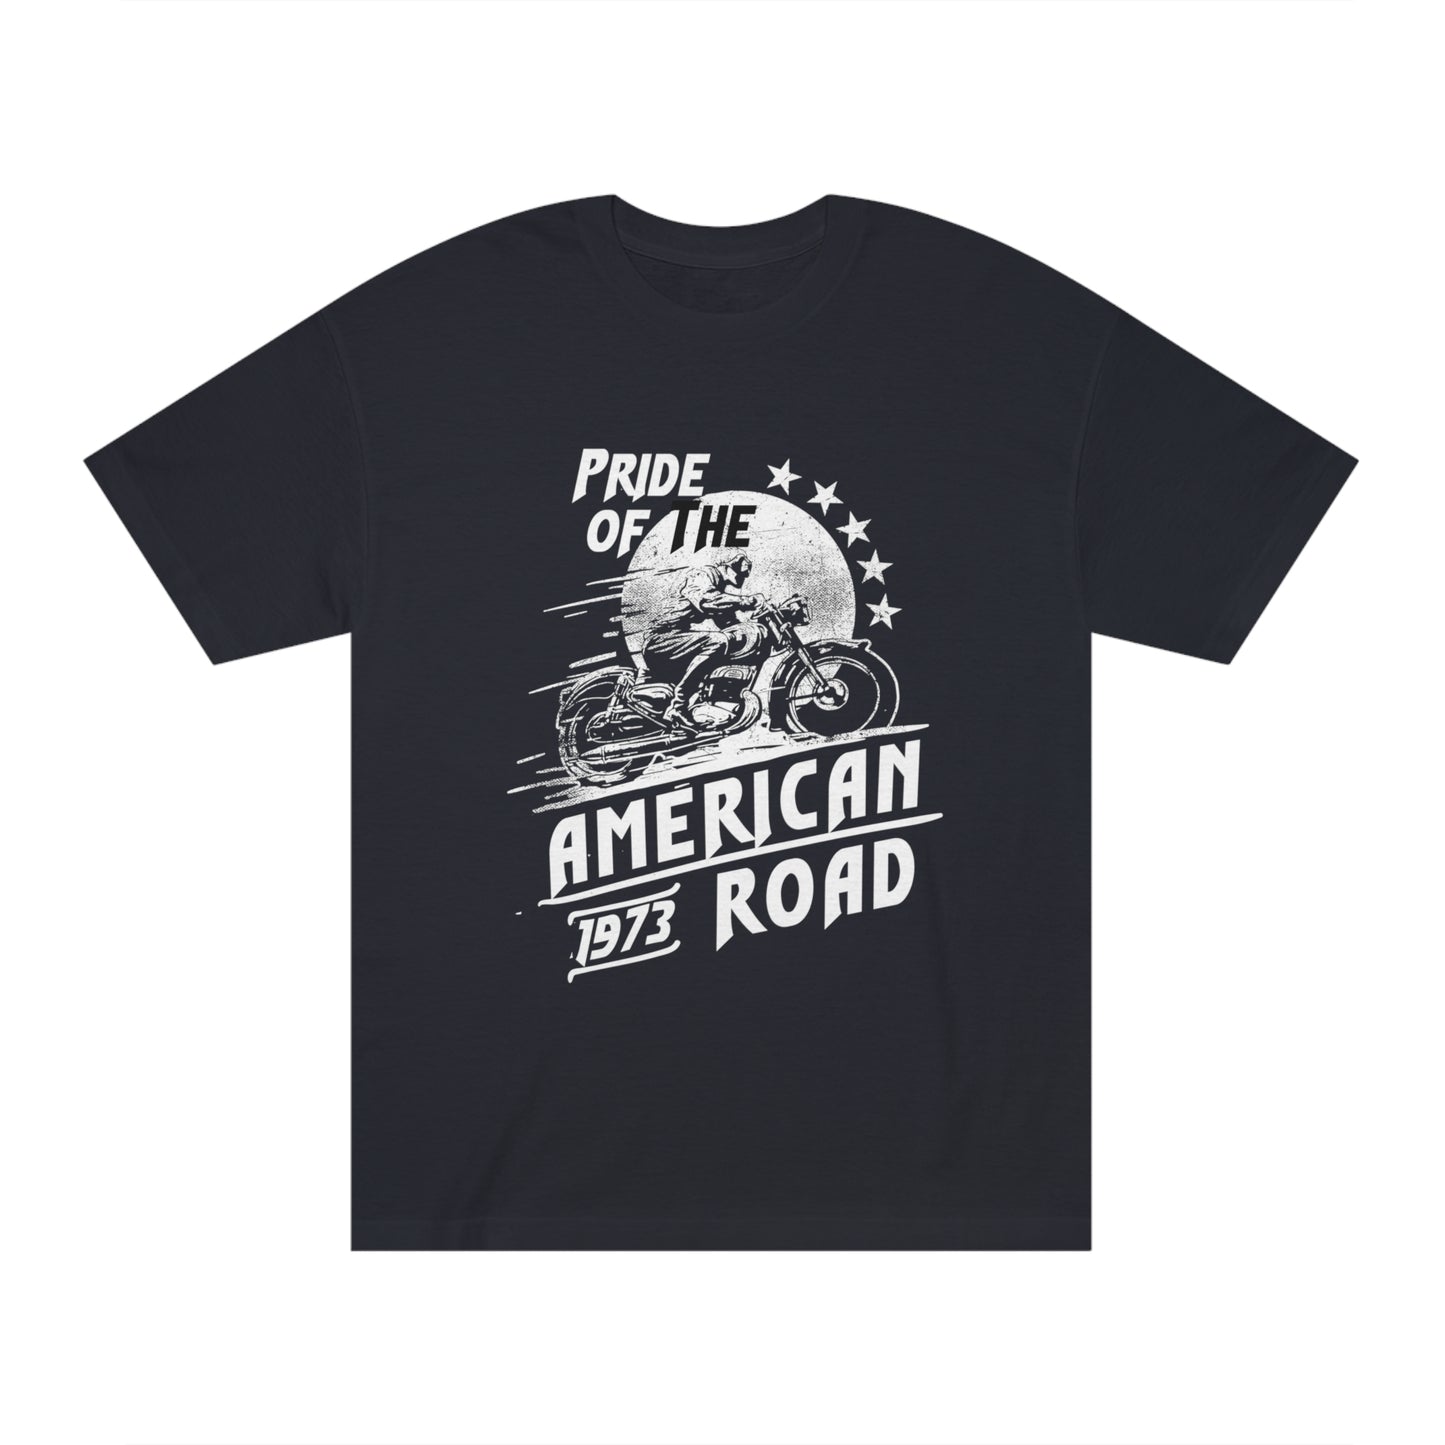 Ride of the american 1973 road Unisex Classic Tee